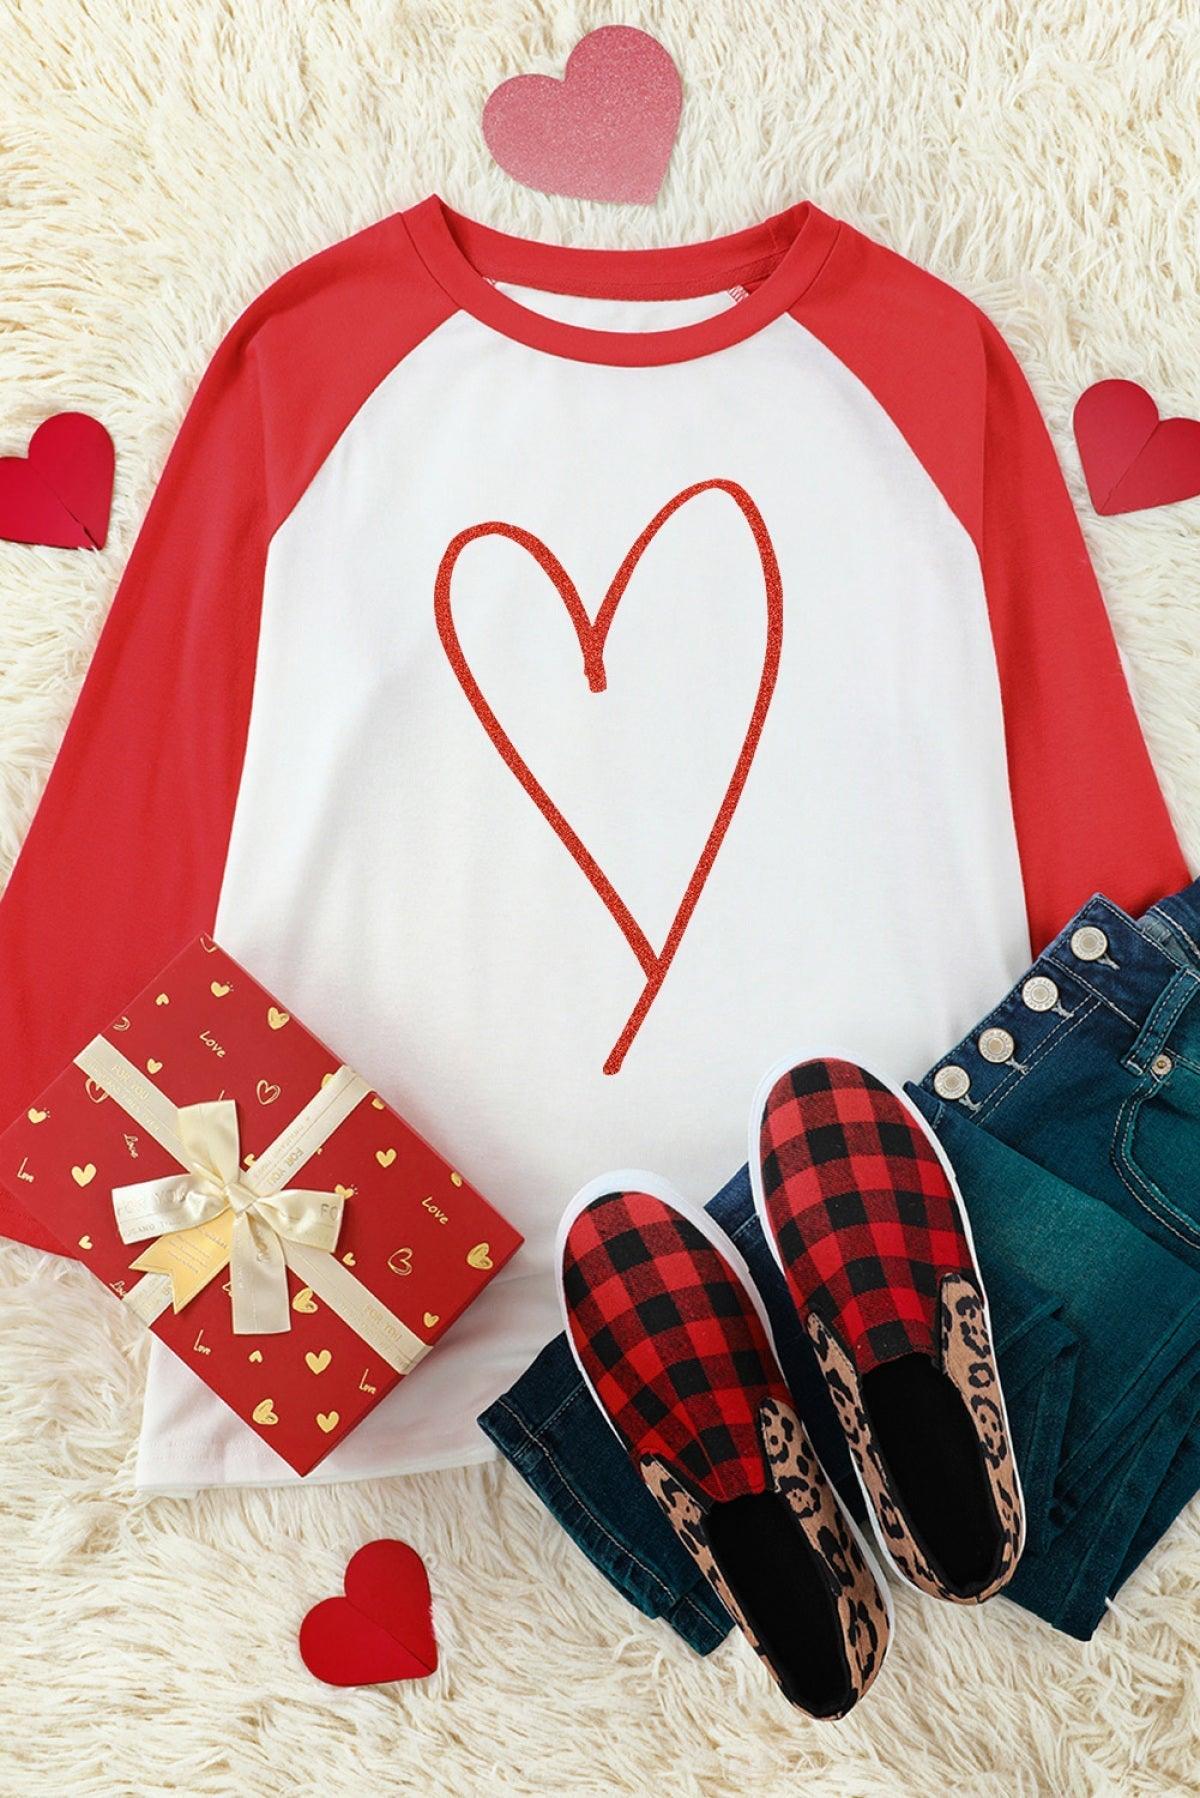 Red Heart Shaped Print Long Sleeve Color Block Top - That’s So Fletch Boutique 